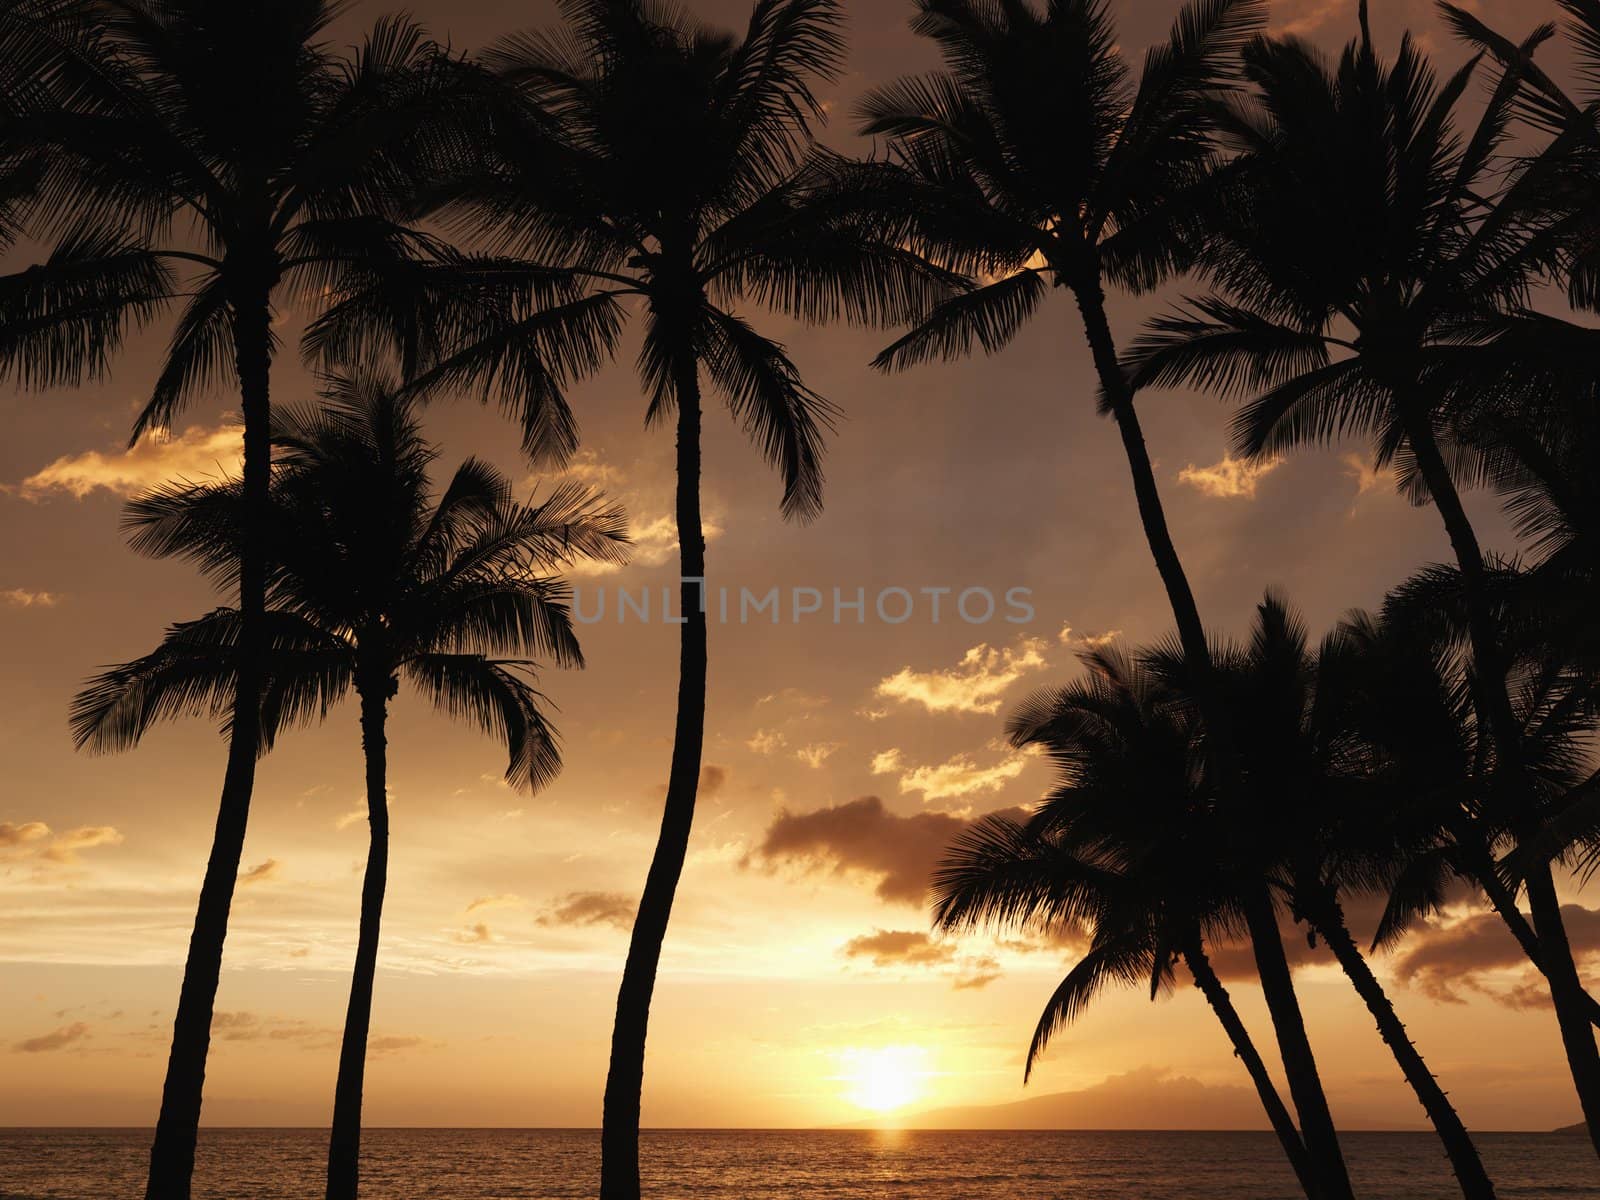 Maui palm trees at sunset. by iofoto